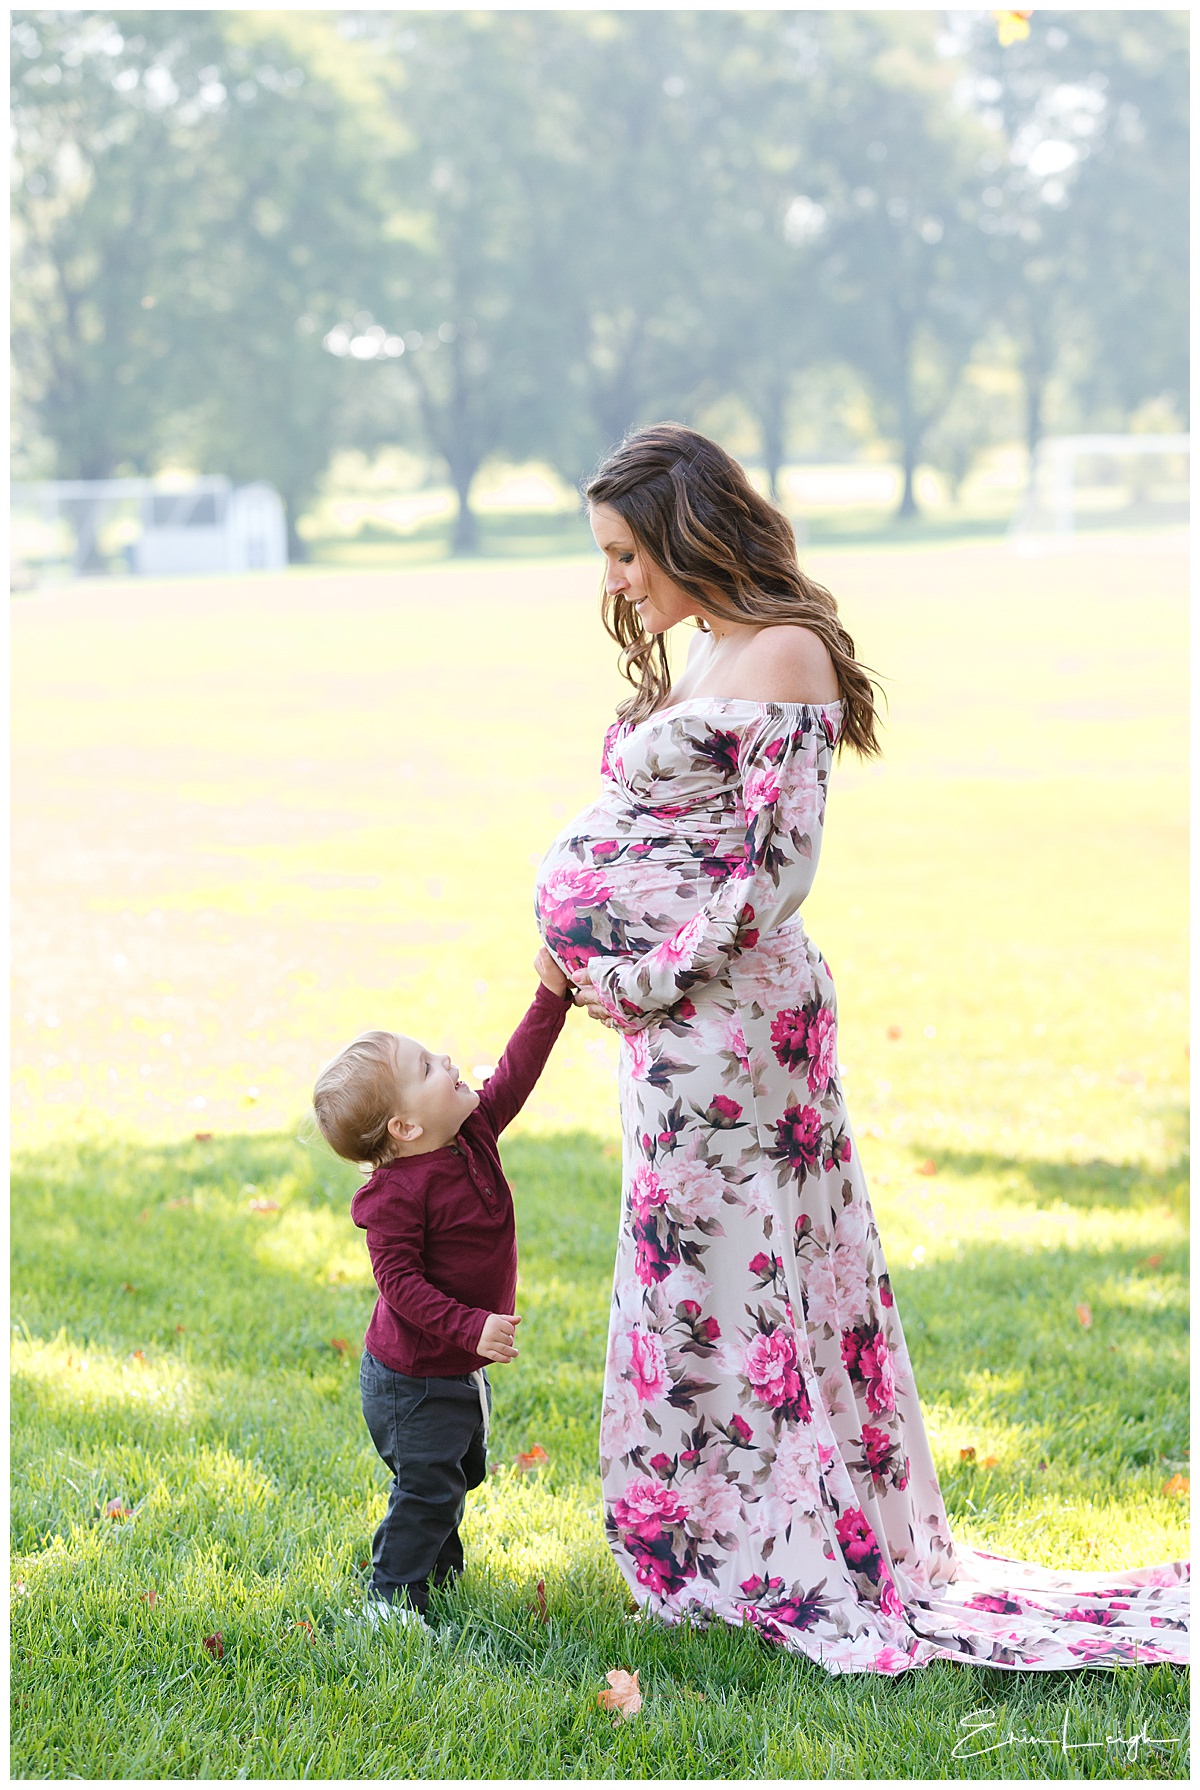 Maternity Photos | Amos Herr Foundation House in Landisville PA by Harrisburg Photographer Photography by Erin Leigh